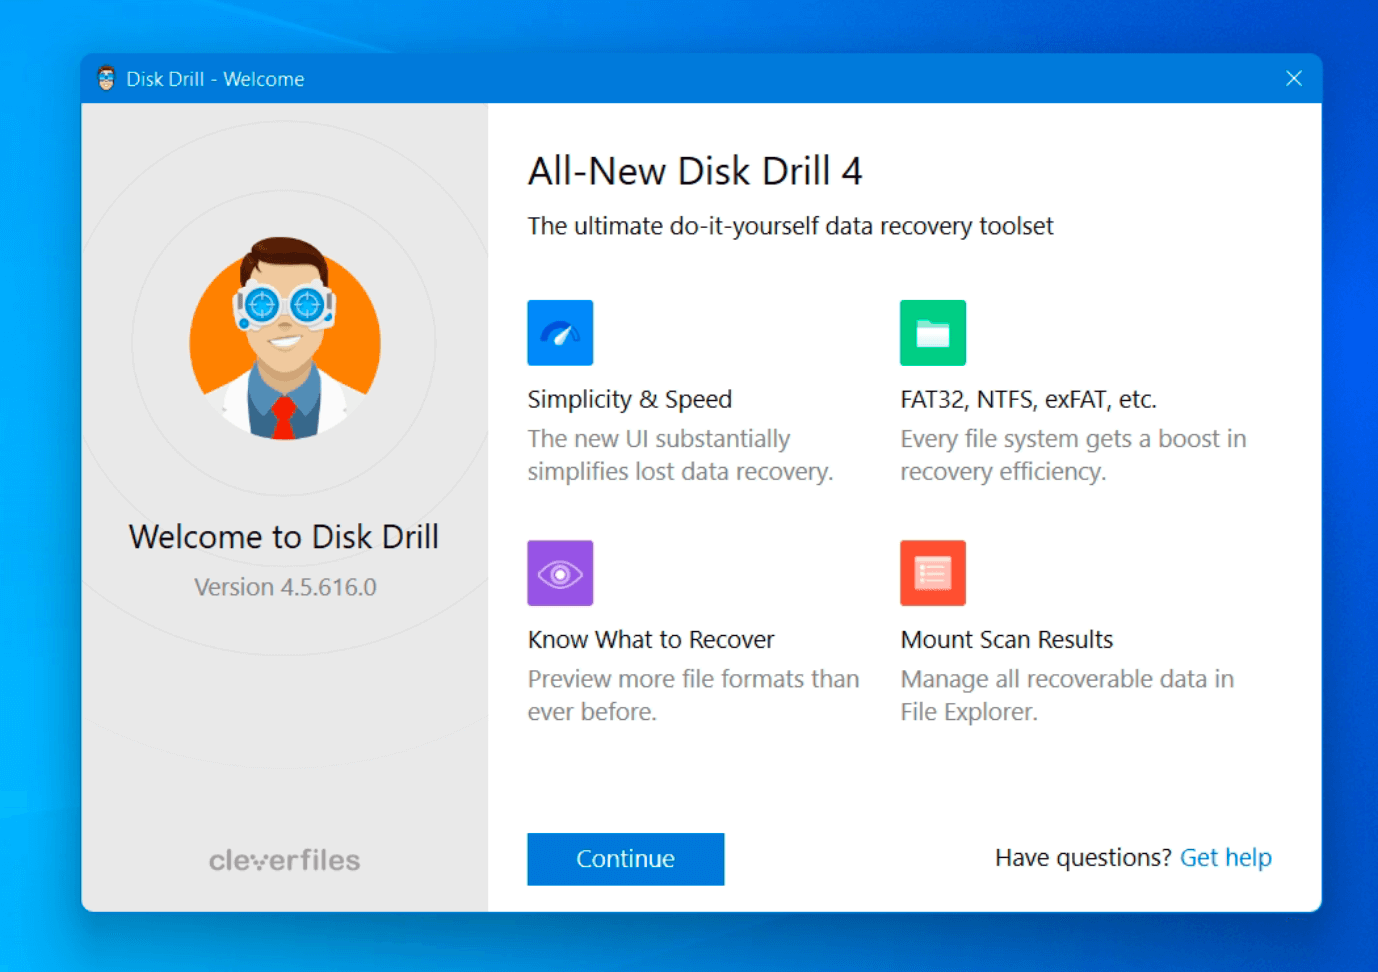 disk drill 4 home screen